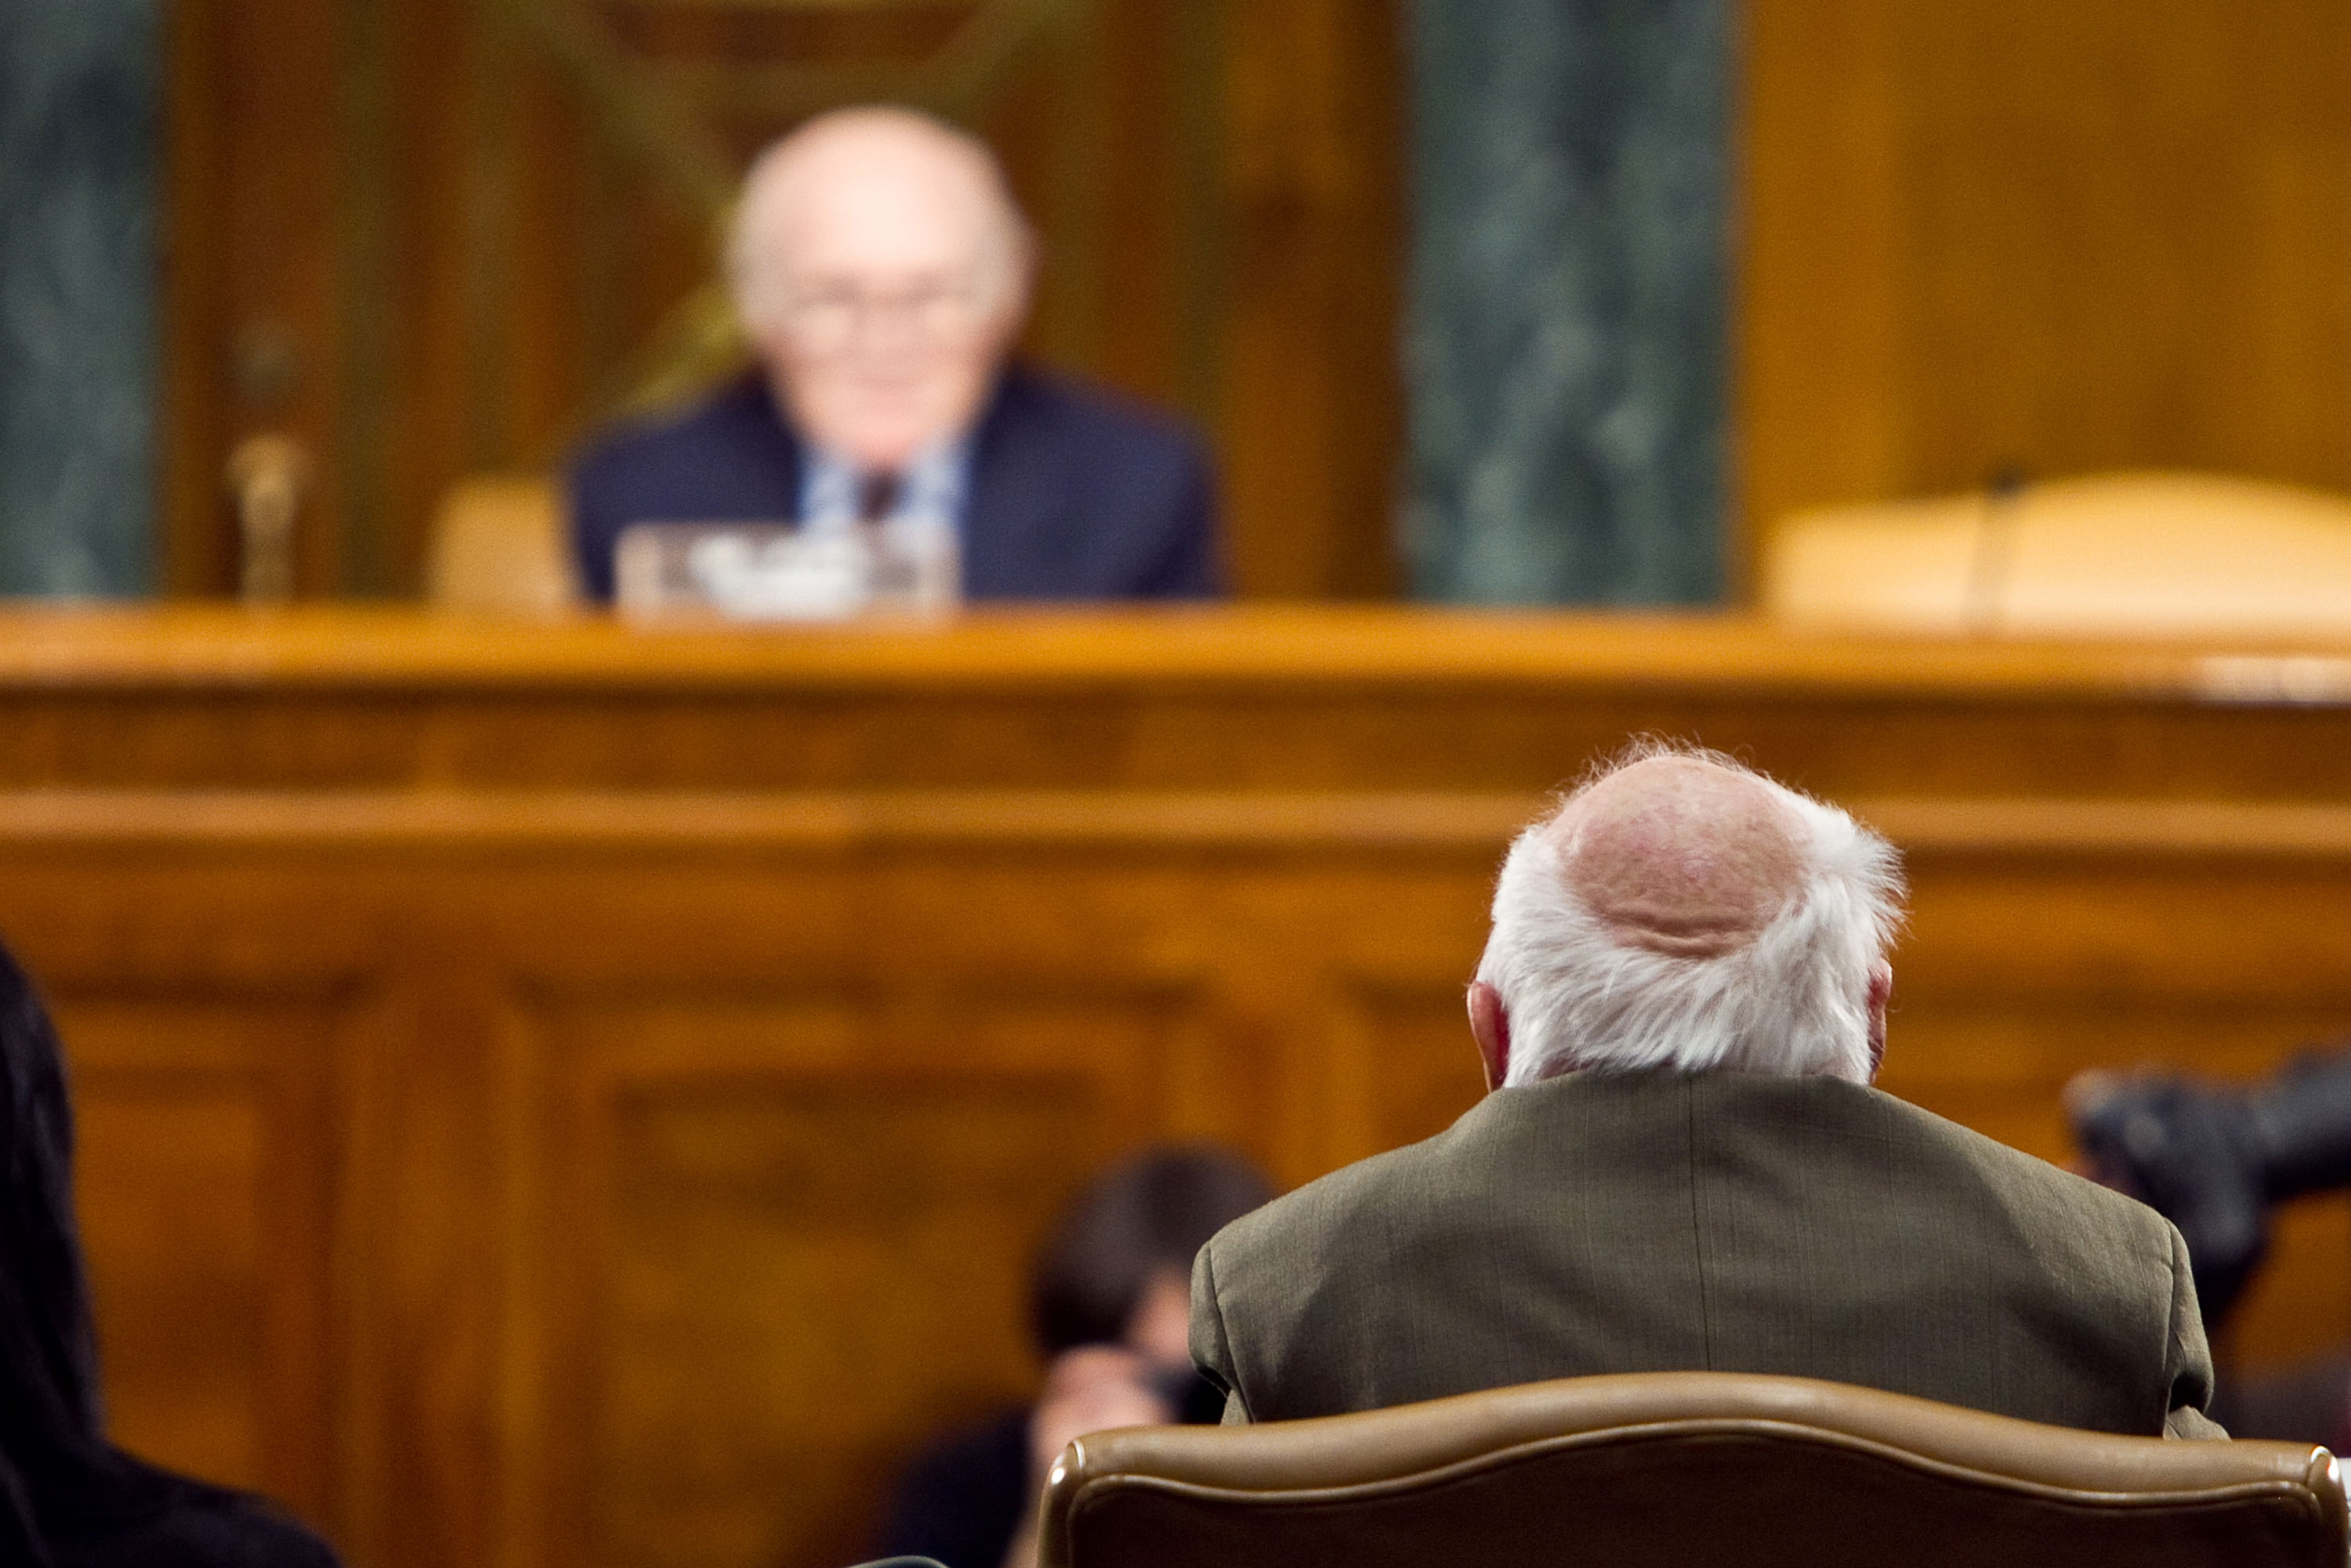 Mickey Rooney testifies at the Justice For All: Ending Elder Abuse, Neglect & Financial Exploitation hearing at the Senate Dirksen Building on March 2, 2011, in Washington, DC. | Source: Getty Images